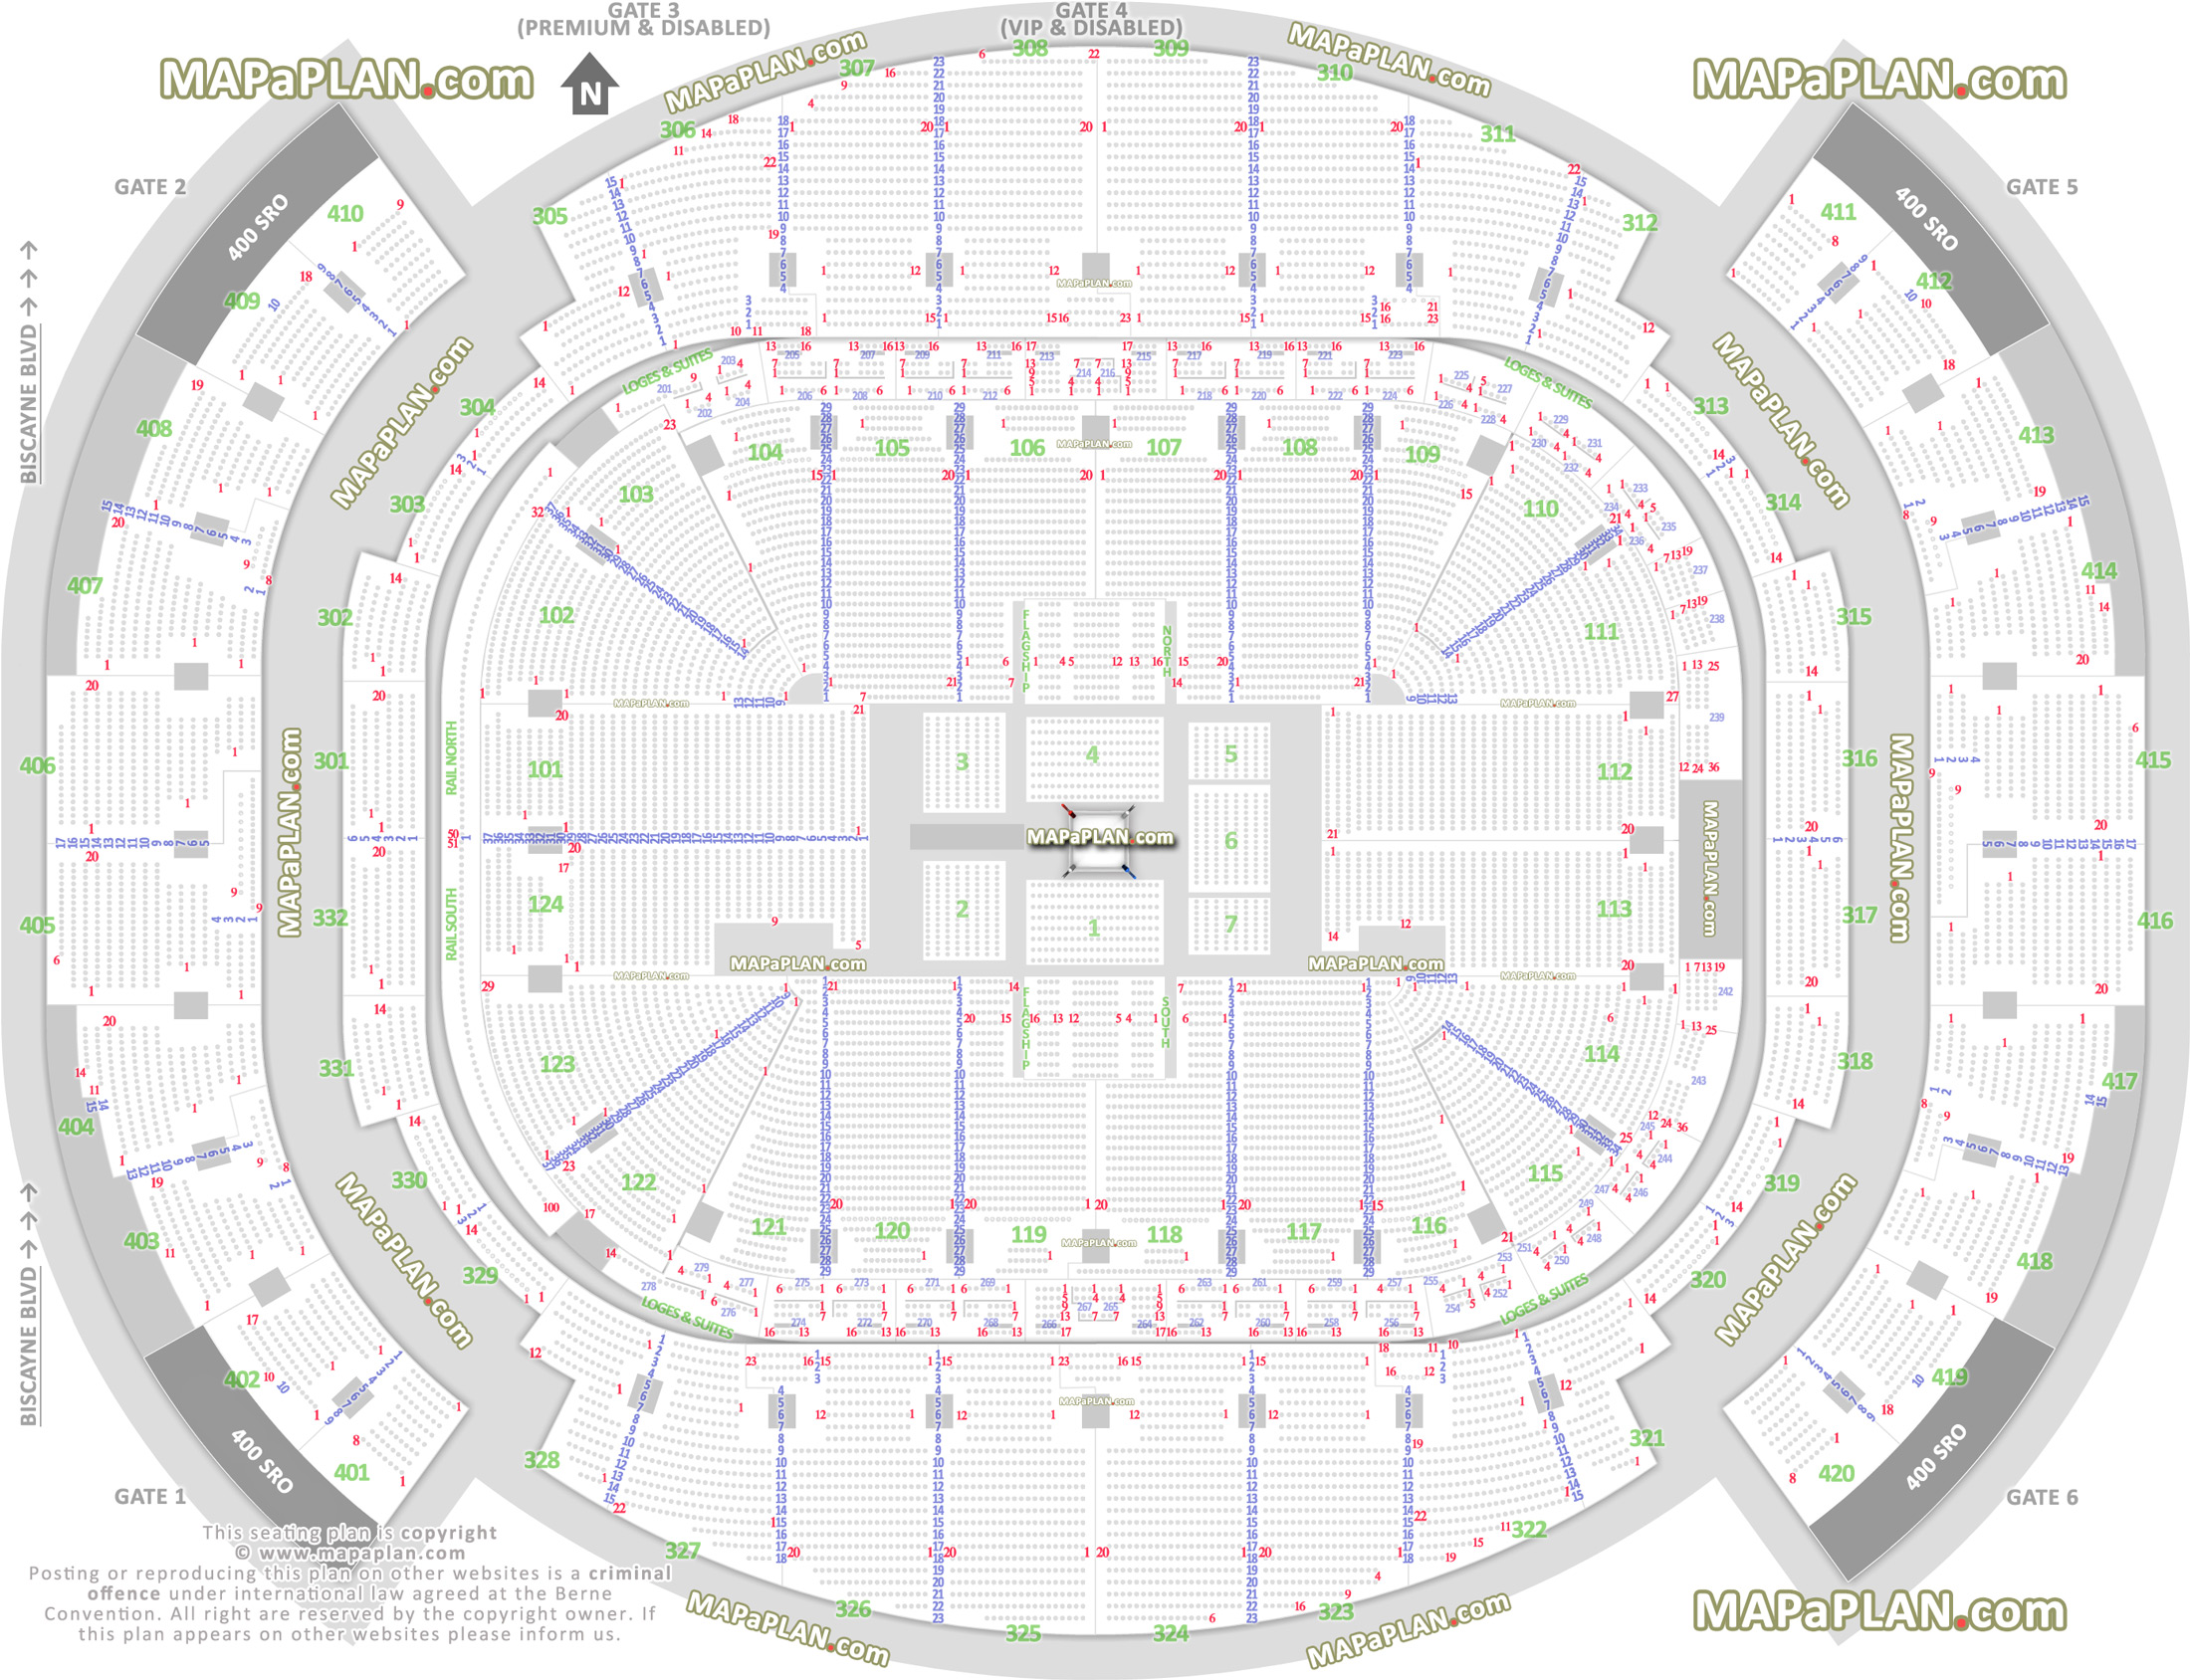 wwe raw smackdown live wrestling boxing events ring 360 configuration row numbers sro standing room only good bad seats Miami Kaseya Center Arena seating chart